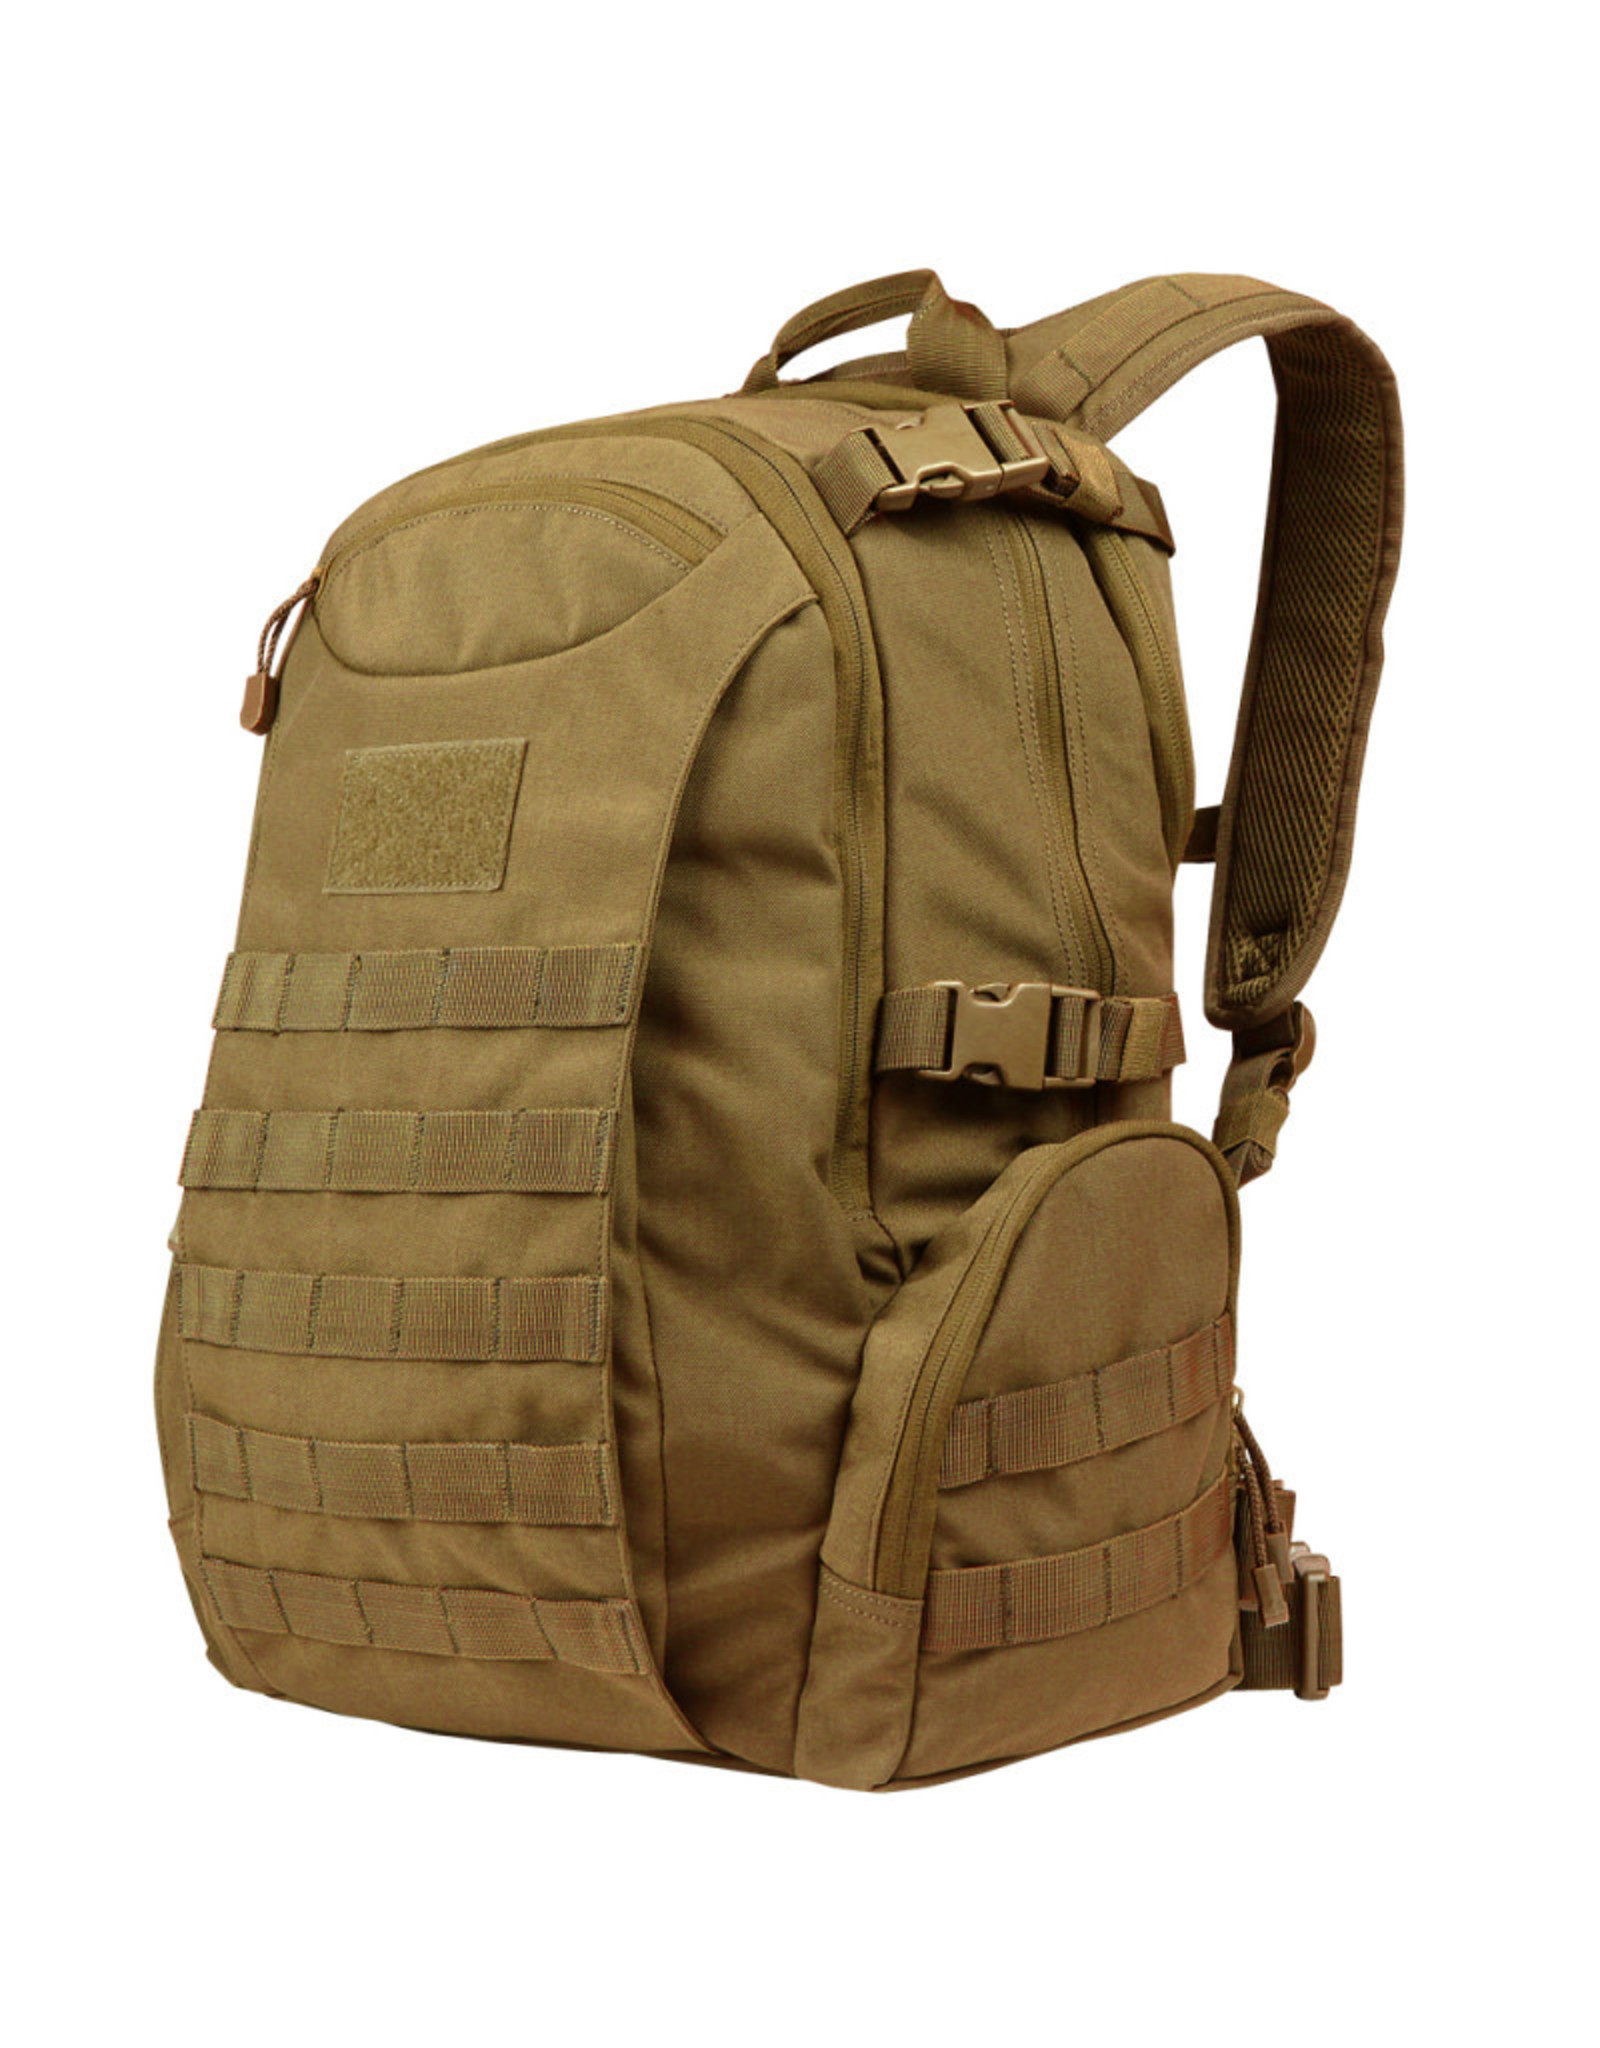 CONDOR TACTICAL COMMUTER PACK (COYOTE)